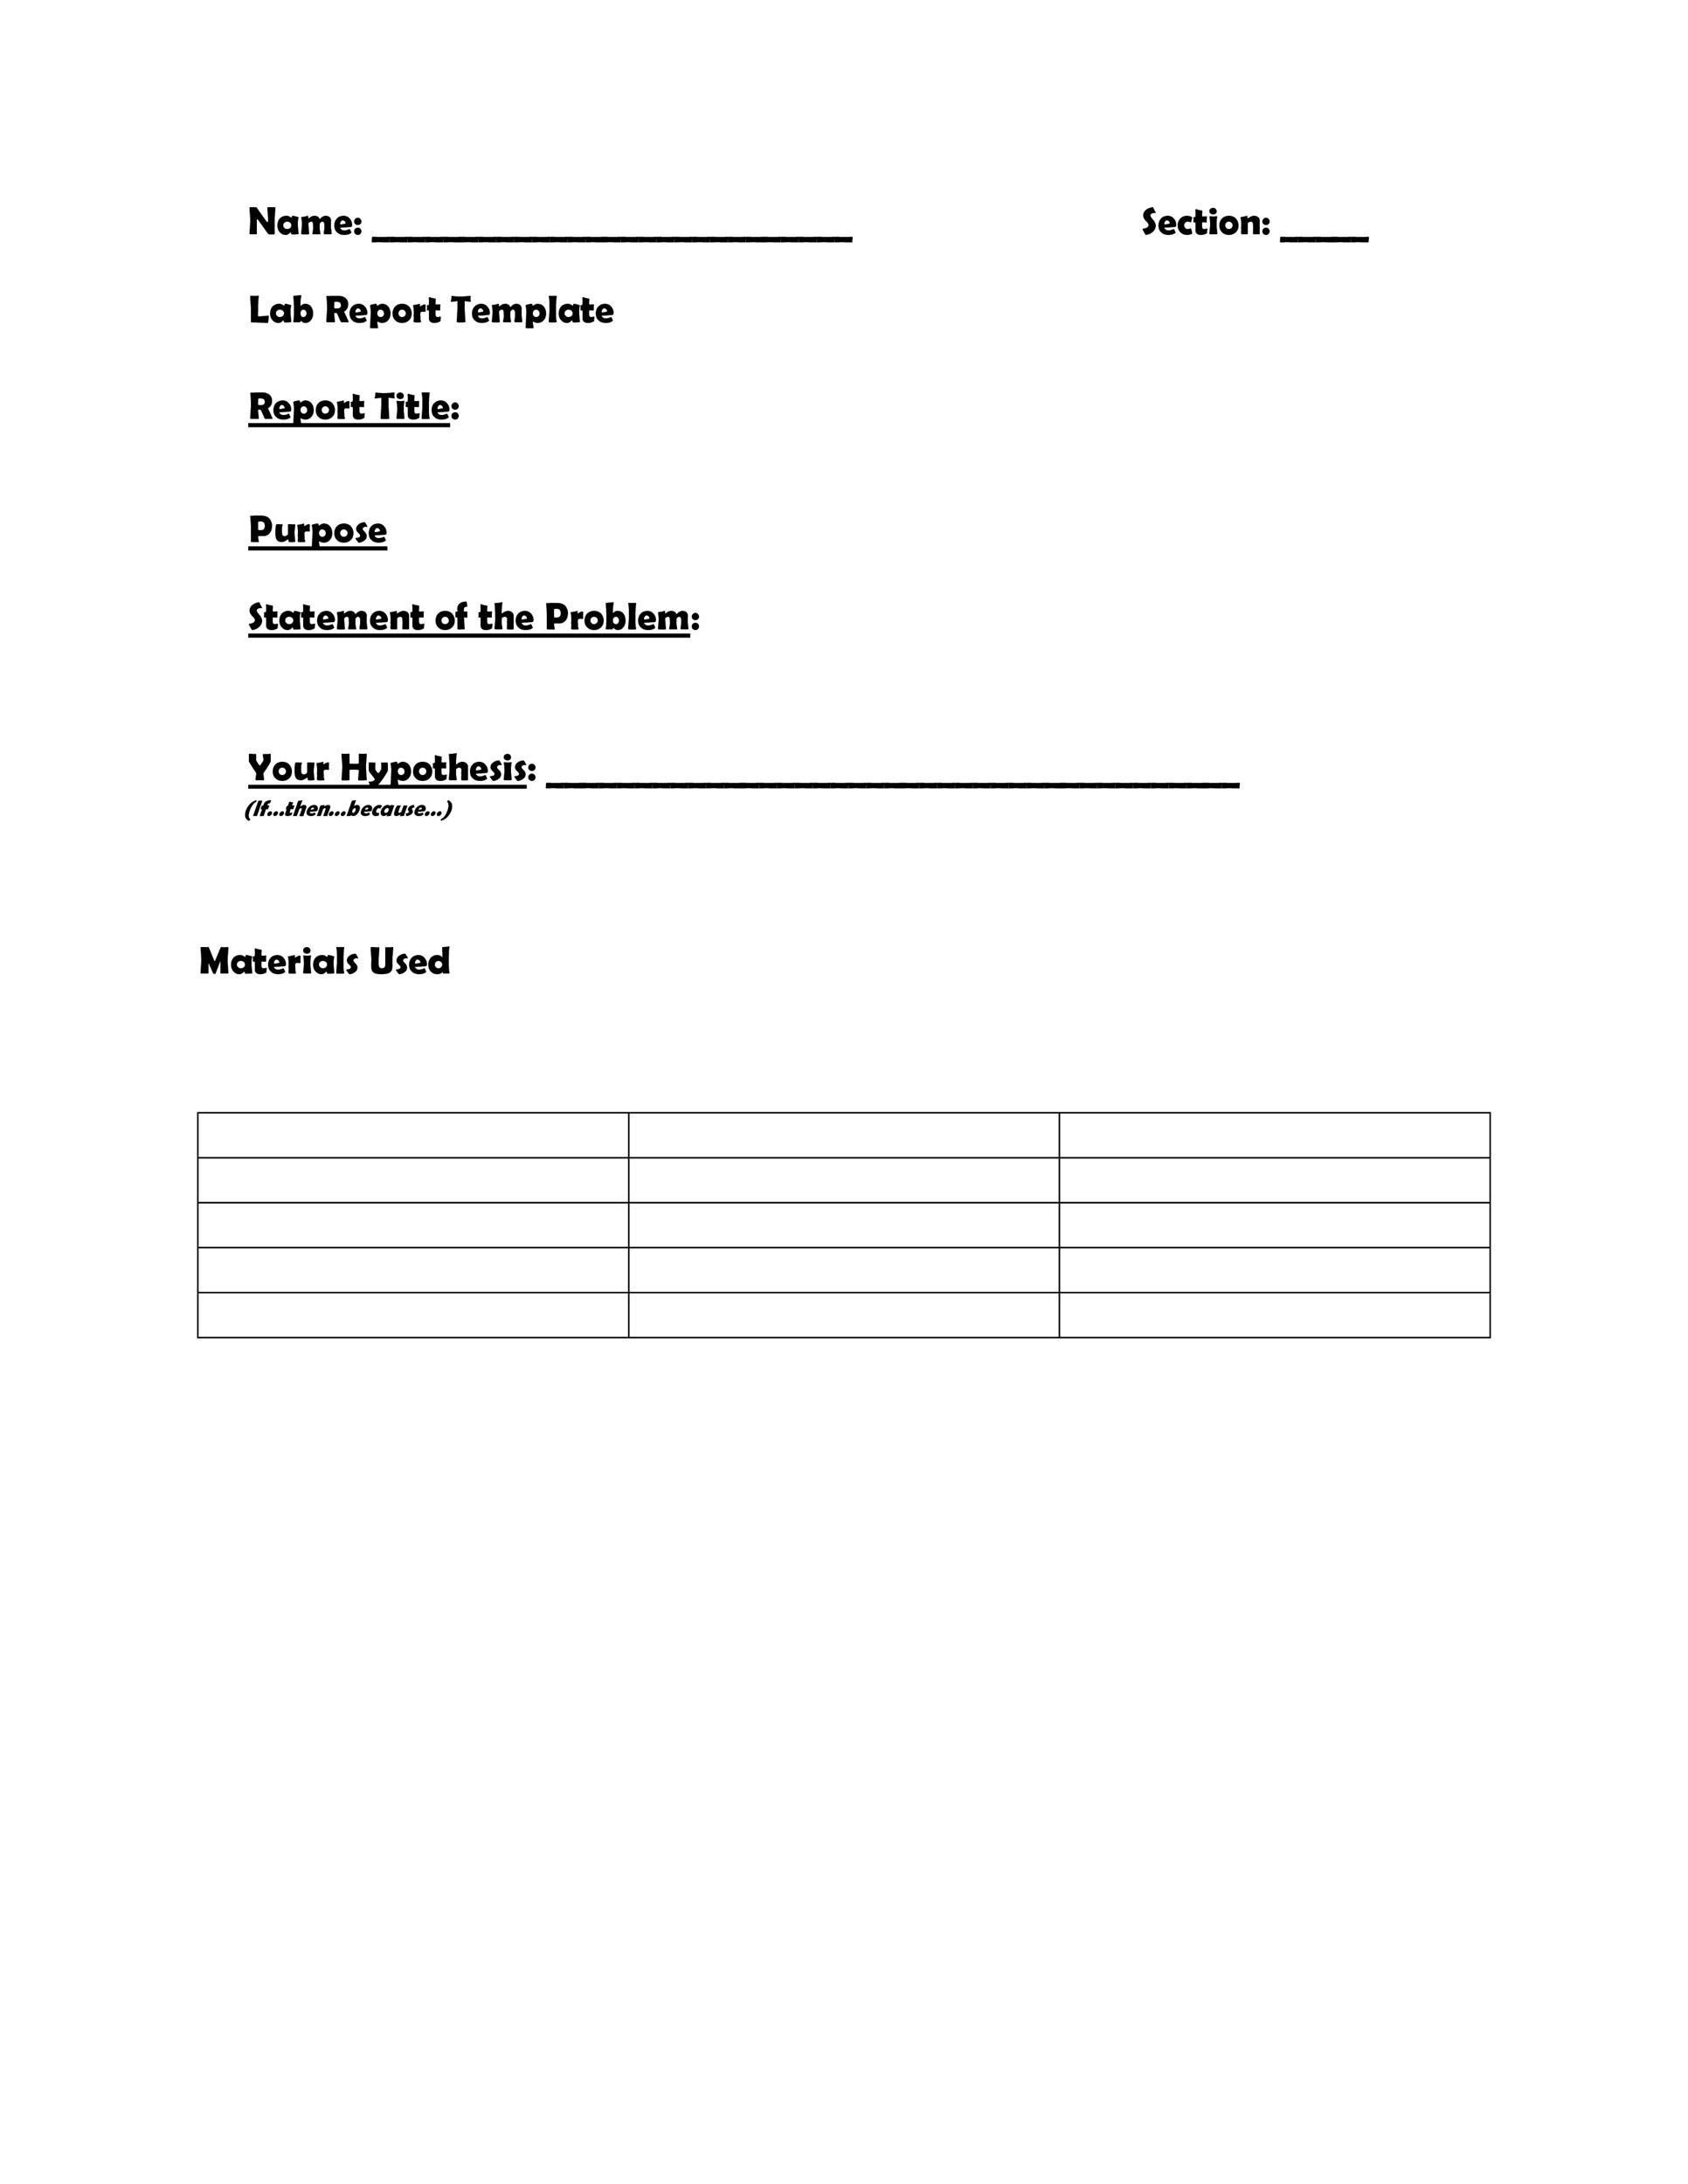 Free lab report template 22